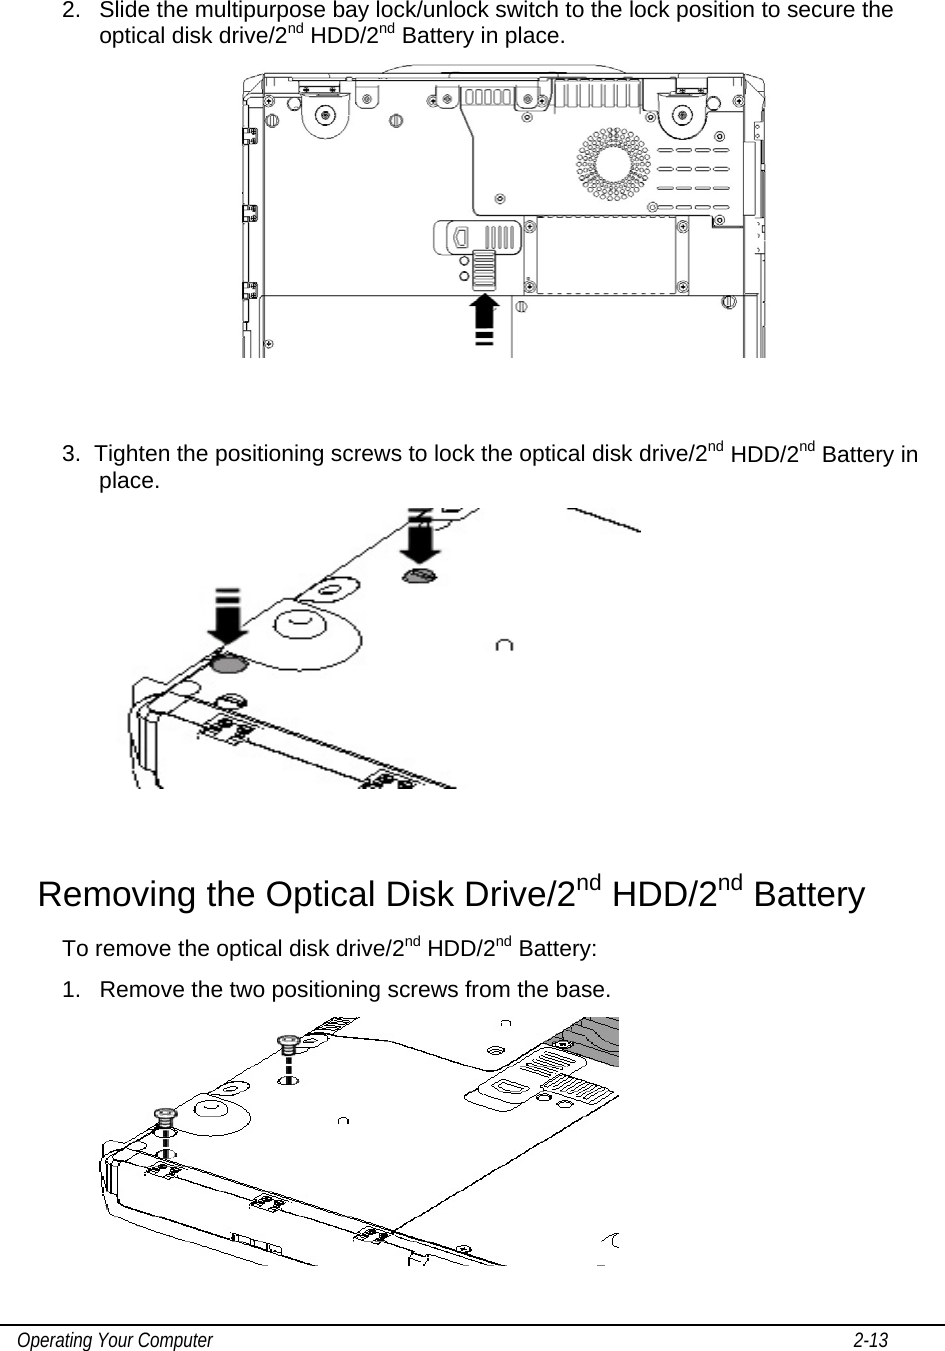    Operating Your Computer                                                                                                                                       2-13   2.  Slide the multipurpose bay lock/unlock switch to the lock position to secure the optical disk drive/2nd HDD/2nd Battery in place.    3.  Tighten the positioning screws to lock the optical disk drive/2nd HDD/2nd Battery in place.   Removing the Optical Disk Drive/2nd HDD/2nd Battery  To remove the optical disk drive/2nd HDD/2nd Battery: 1.  Remove the two positioning screws from the base.   